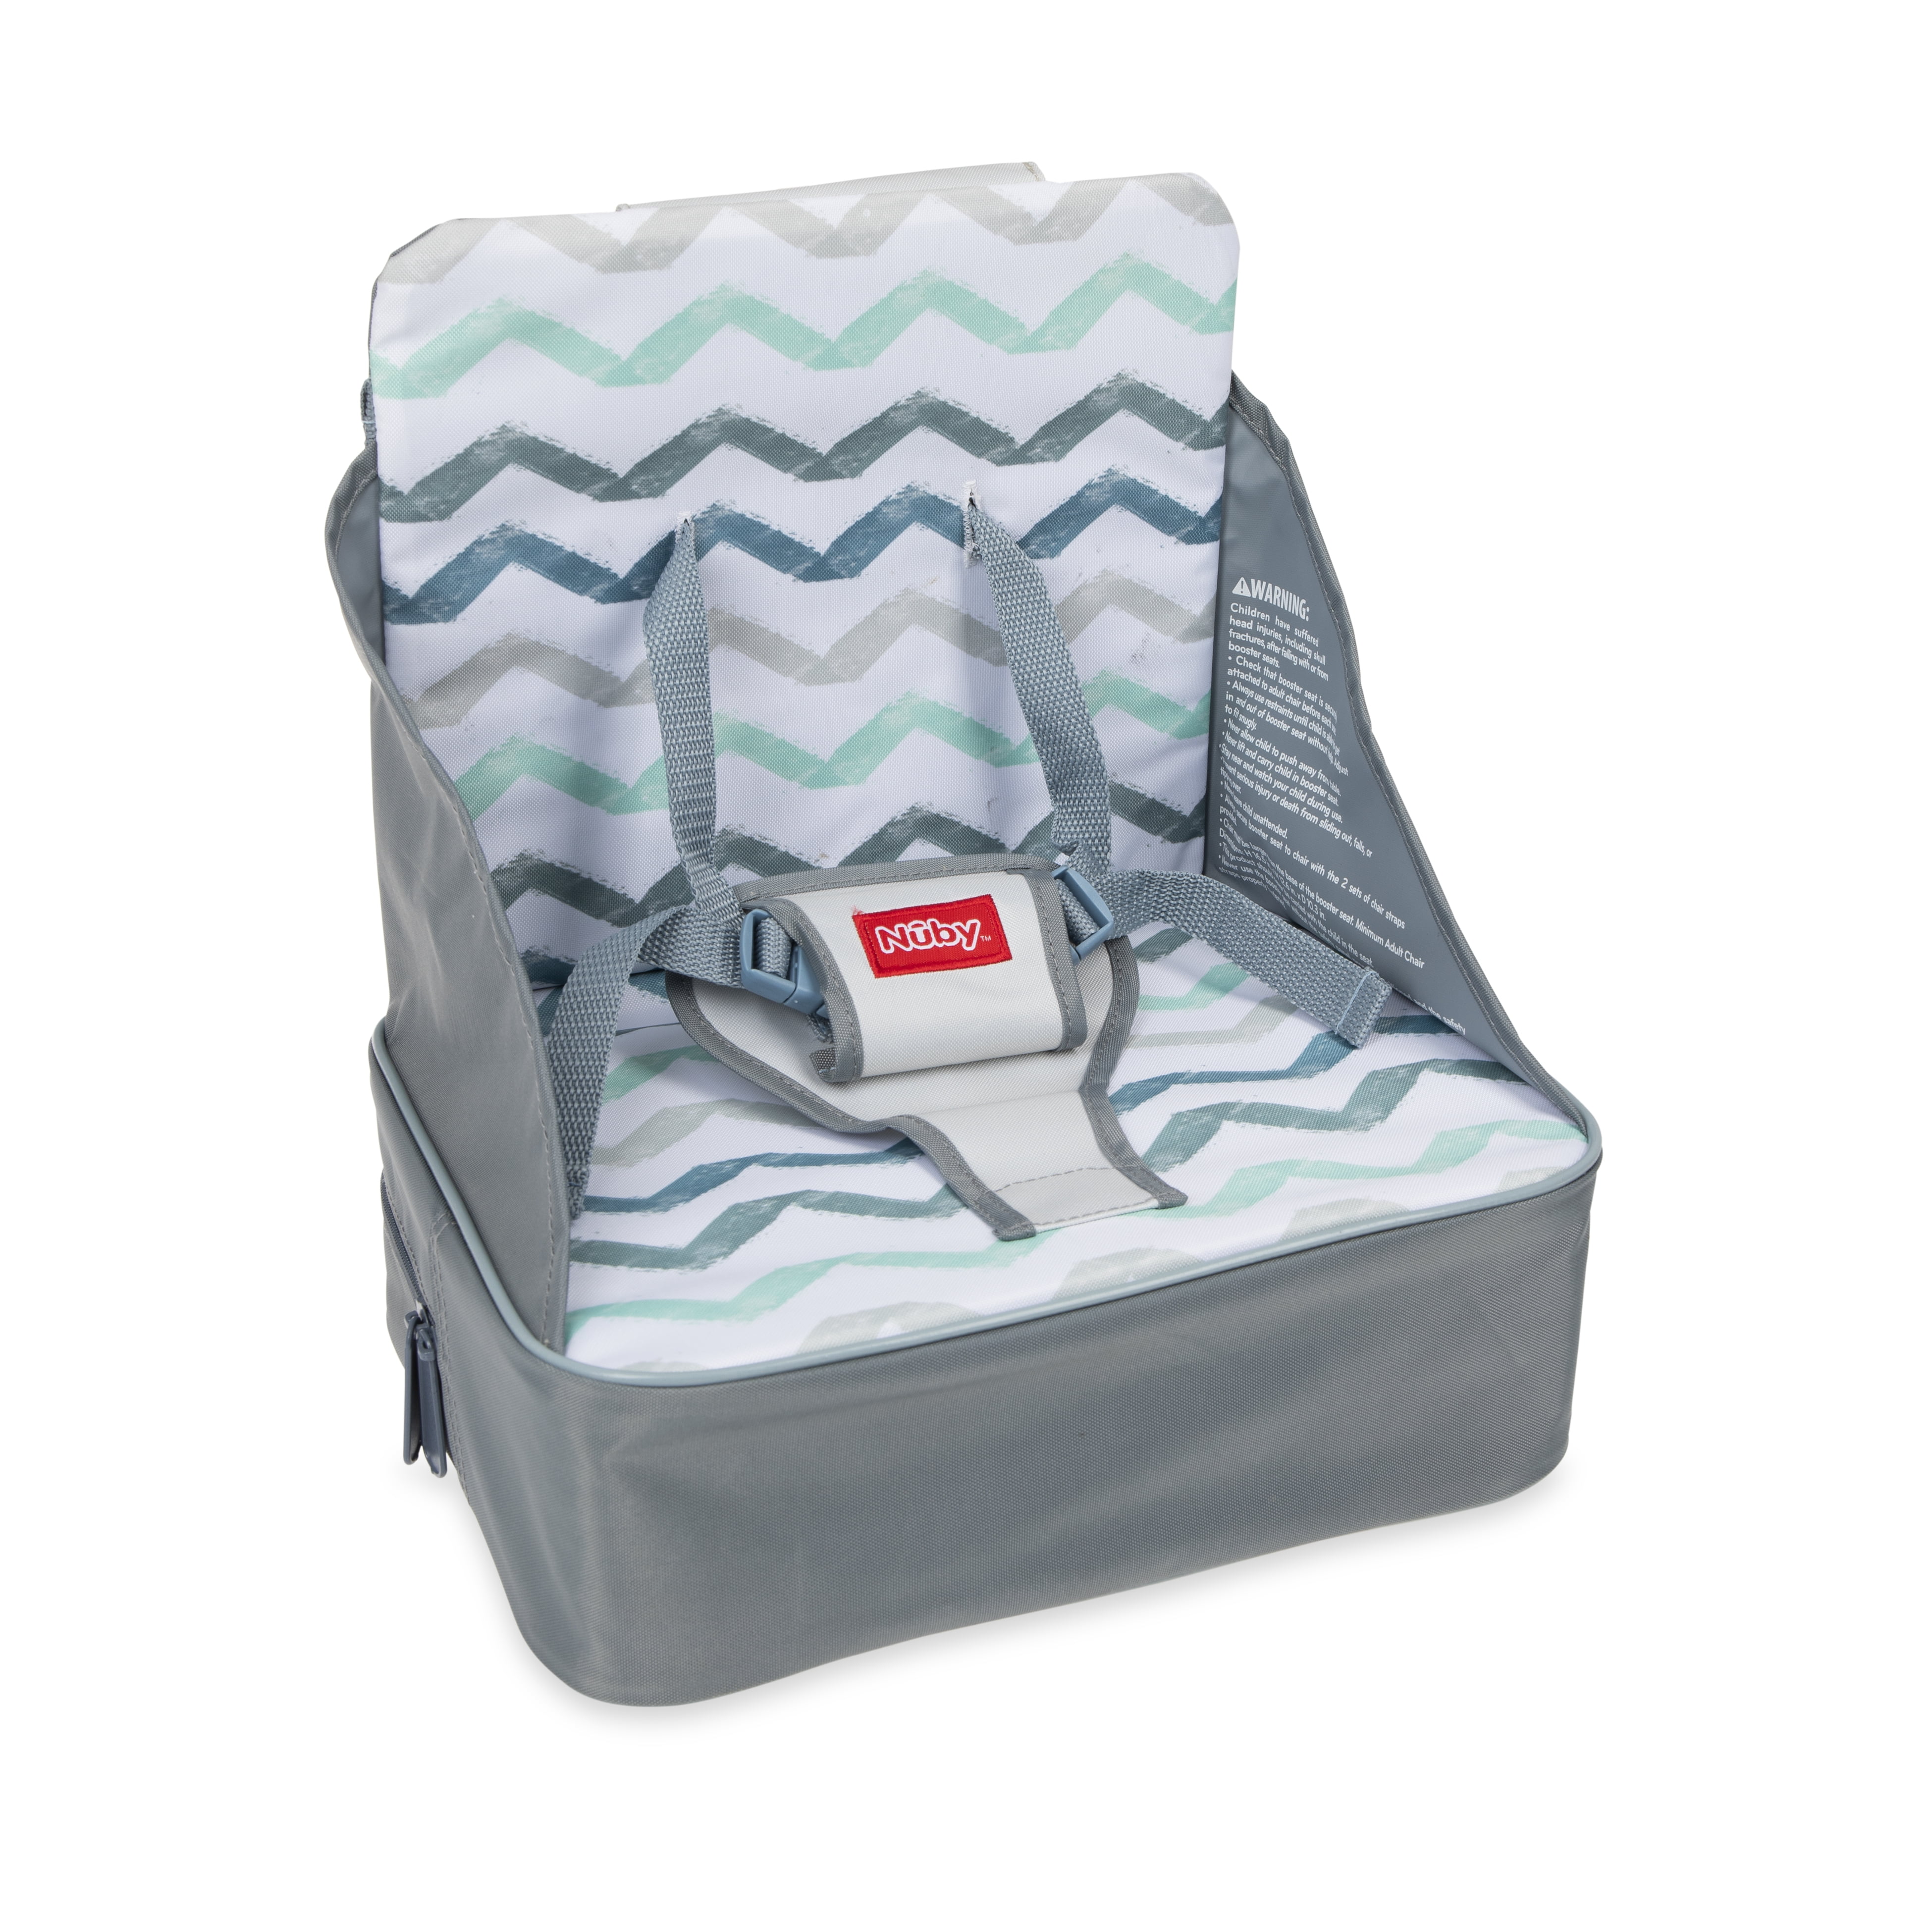 Nuby Easy Go Booster Seat with Adjustable Safety Straps and Harness, Gray,  Unisex